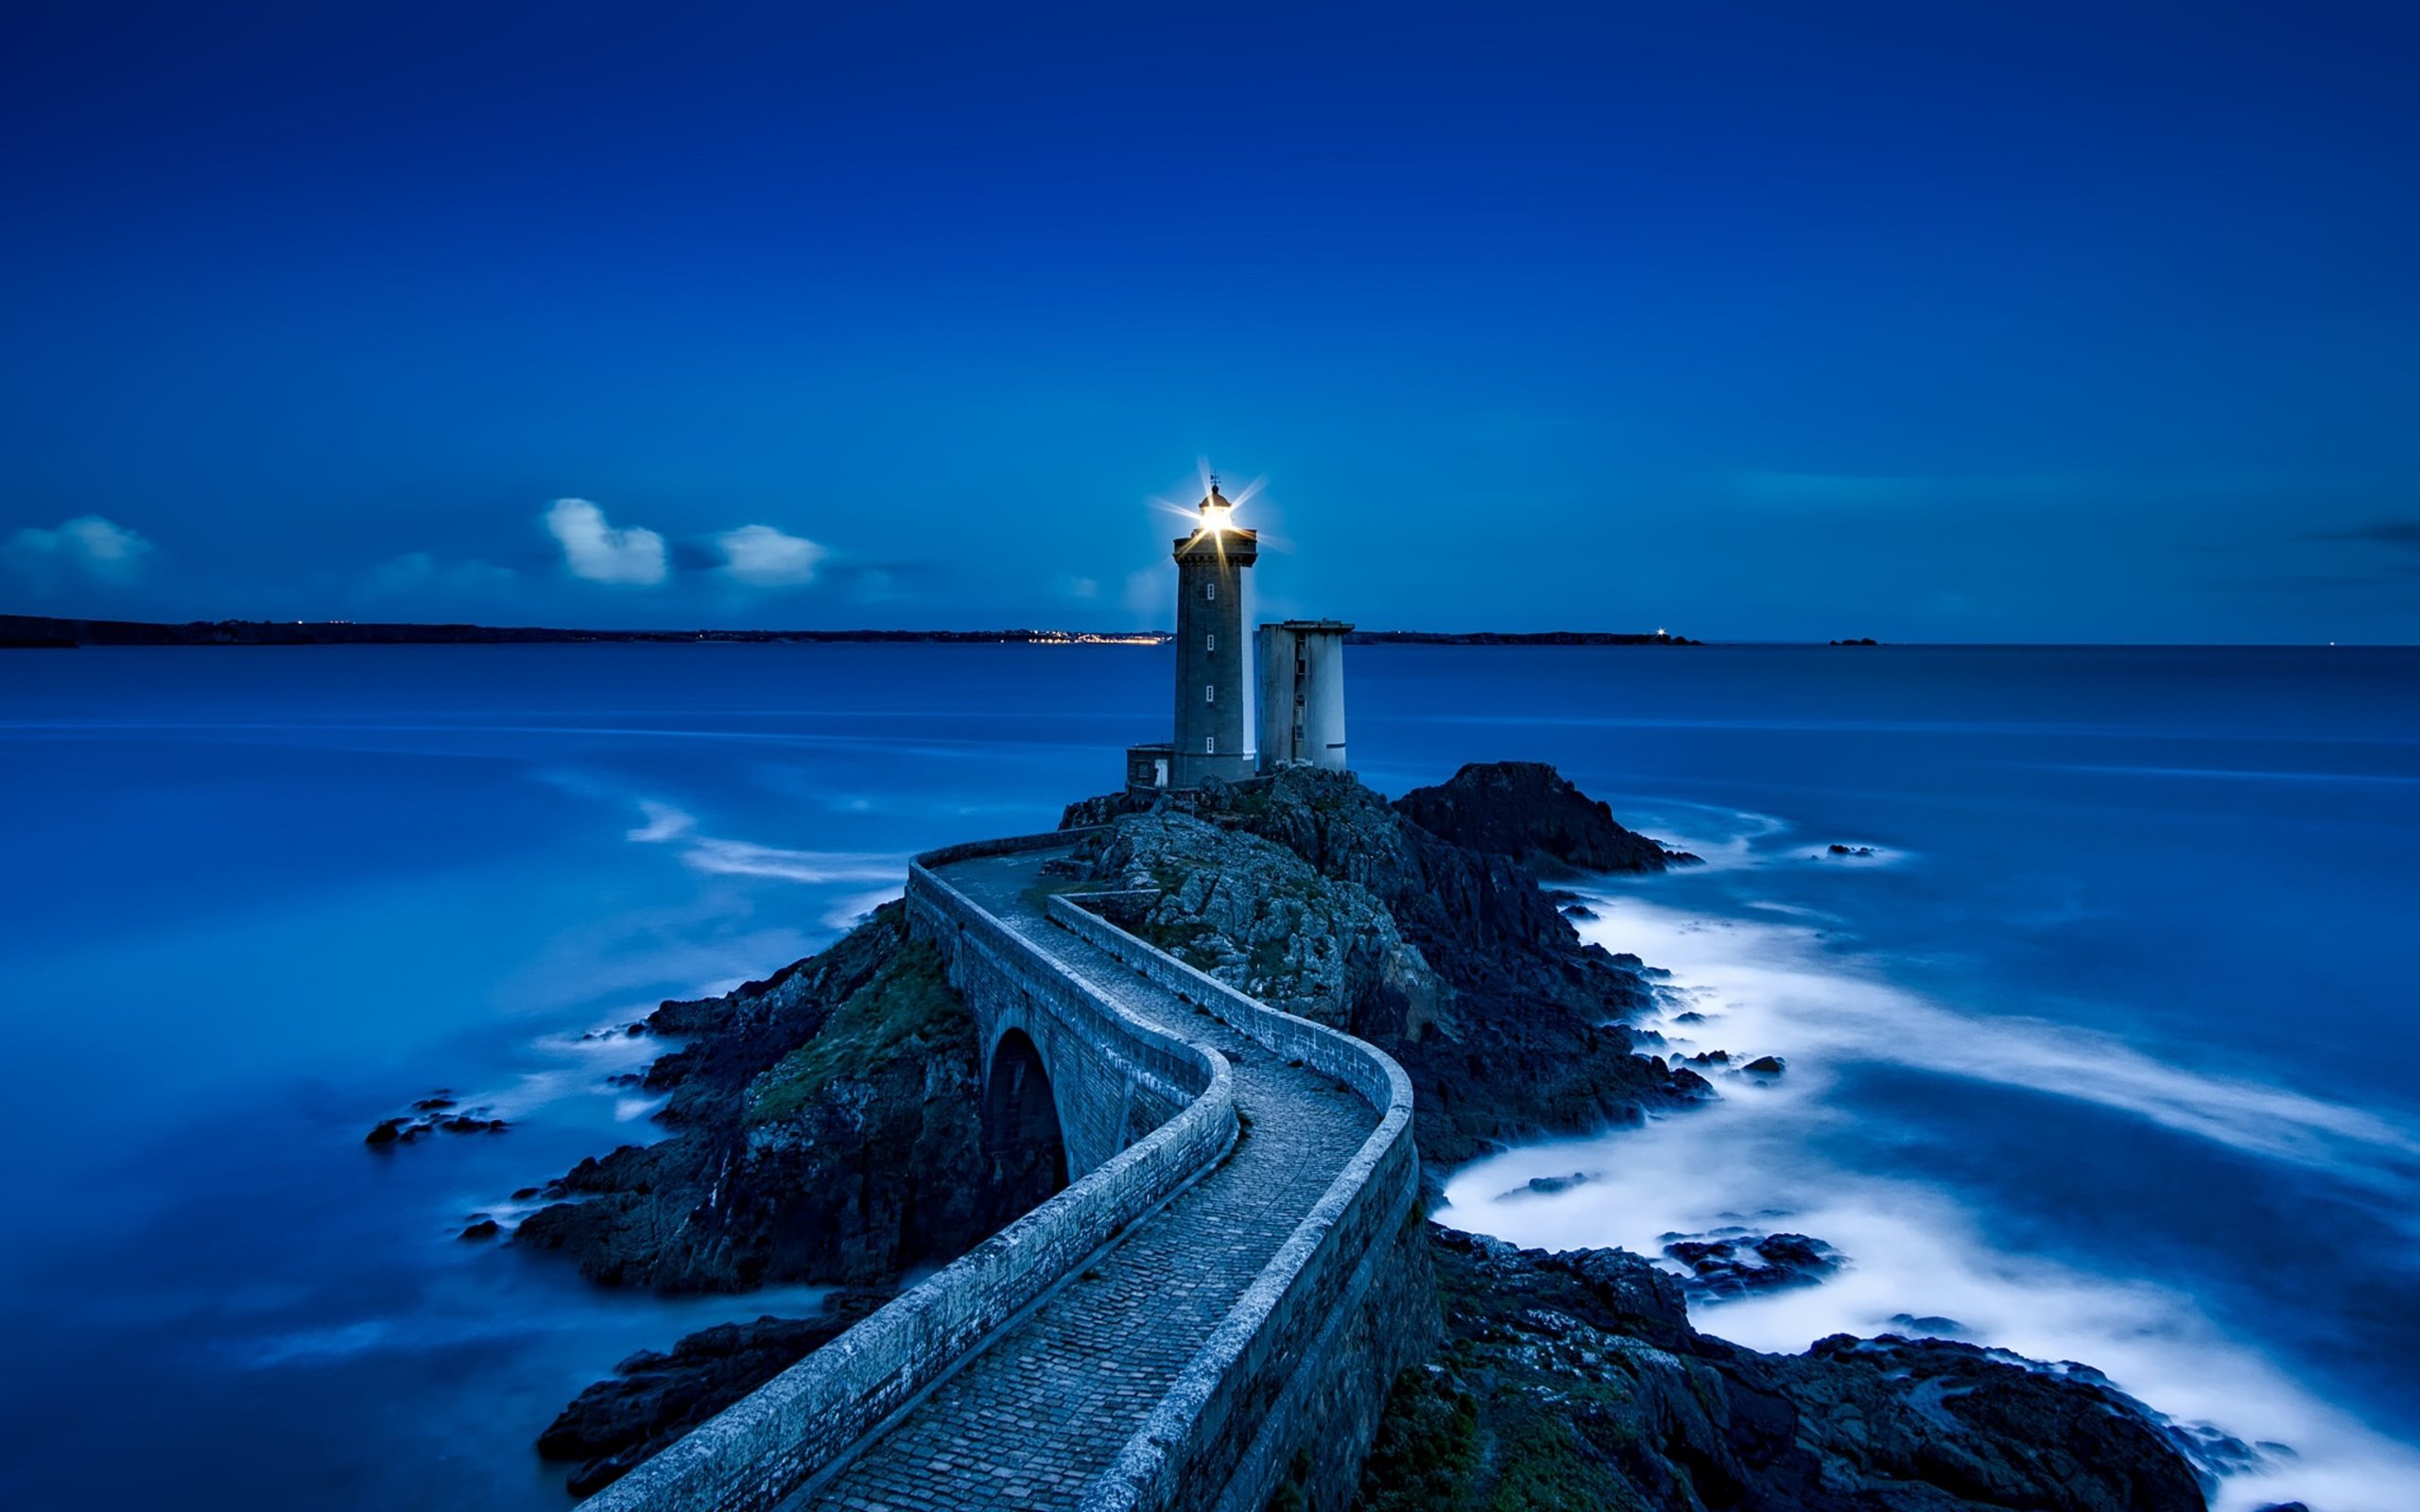 Download Wallpapers Lighthouse Night Sea France Europe For Desktop With Resolution 2560x1600 High Quality Hd Pictures Wallpapers